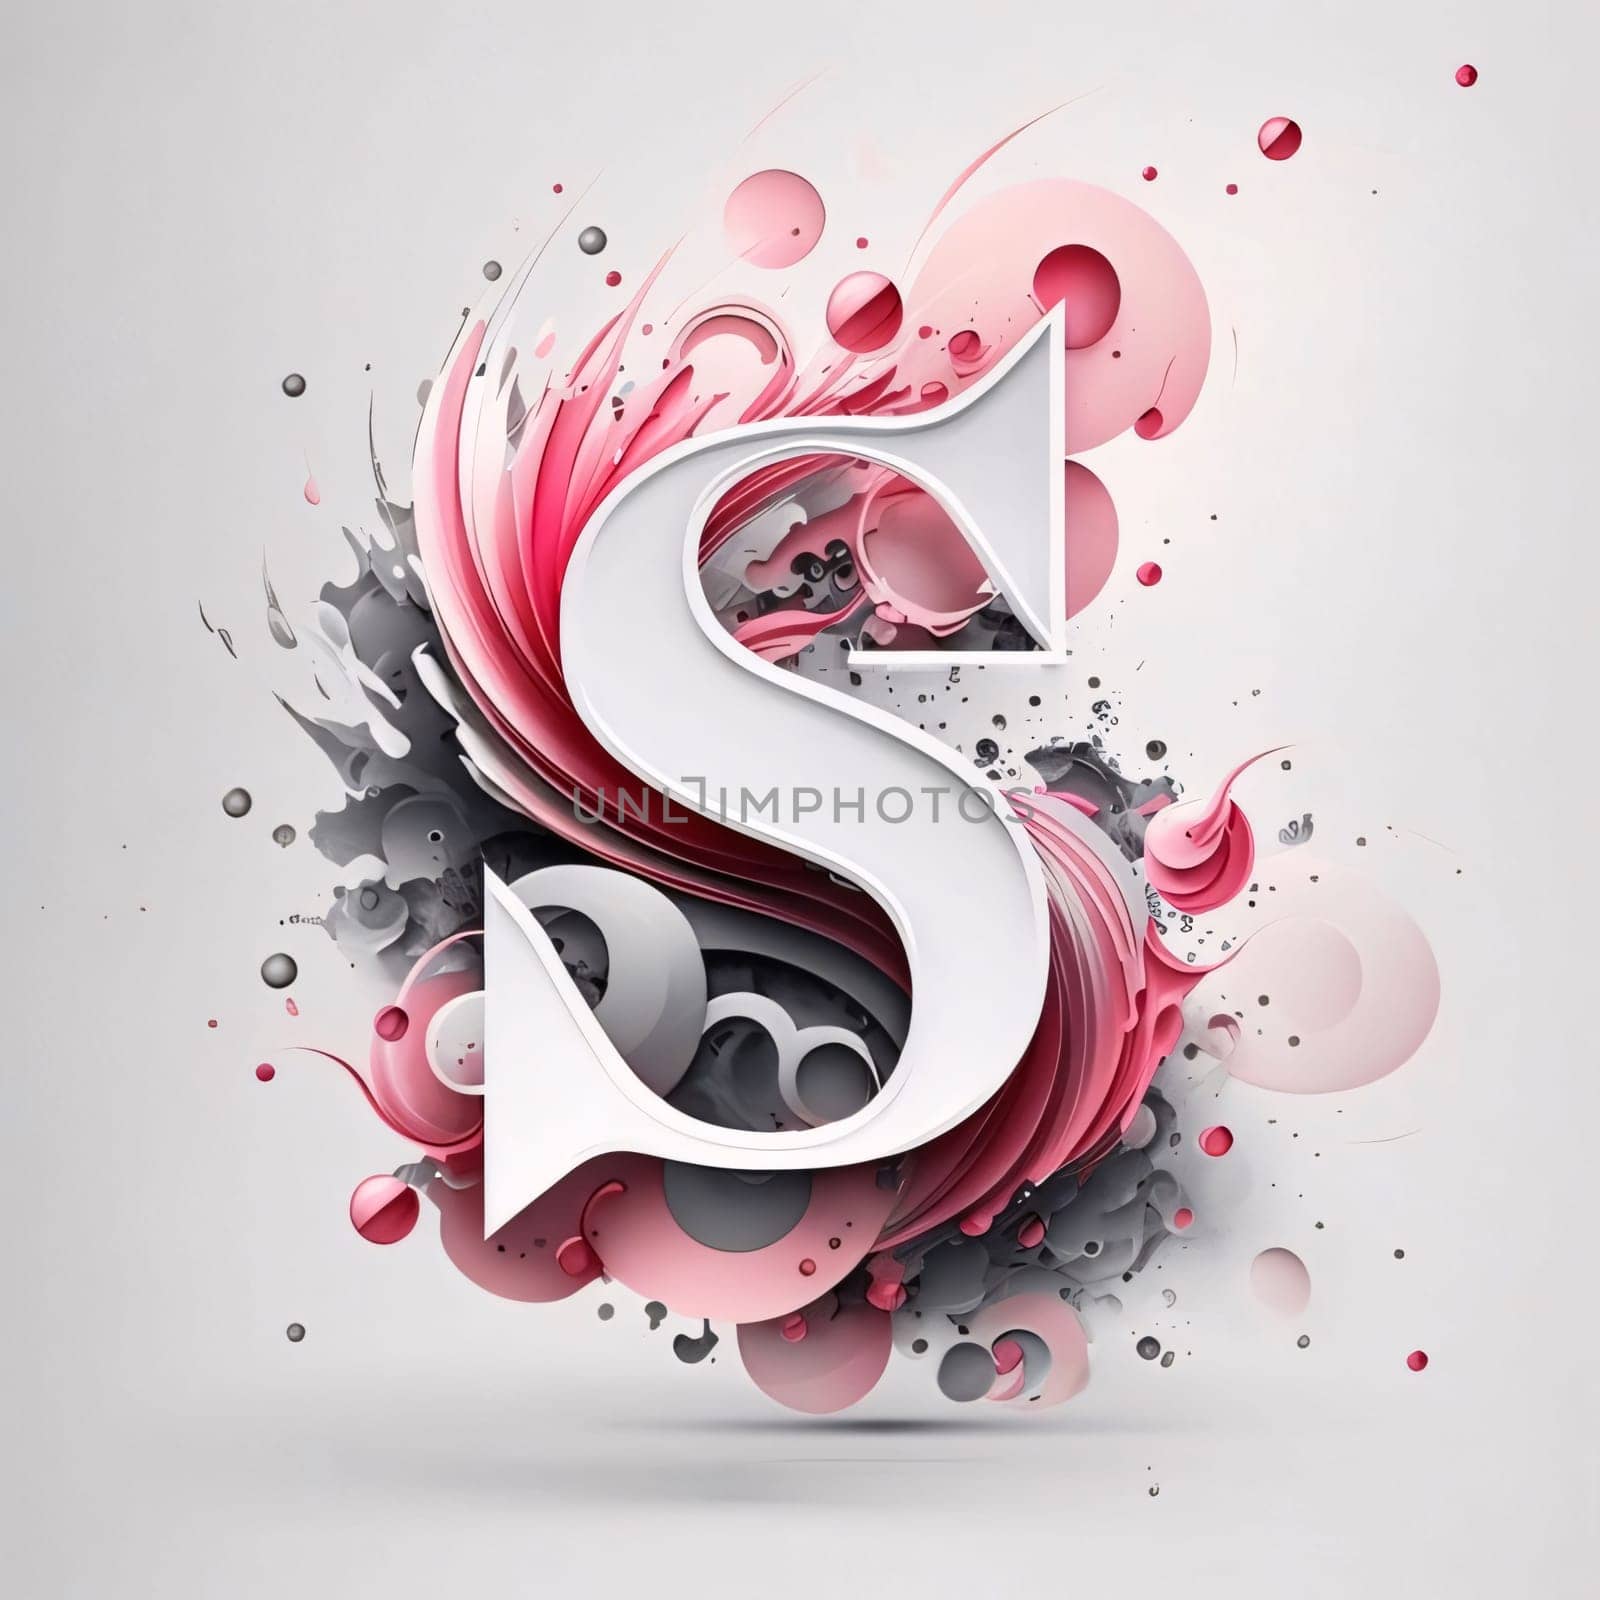 Graphic alphabet letters: 3d letter S on abstract watercolor background. Vector illustration.